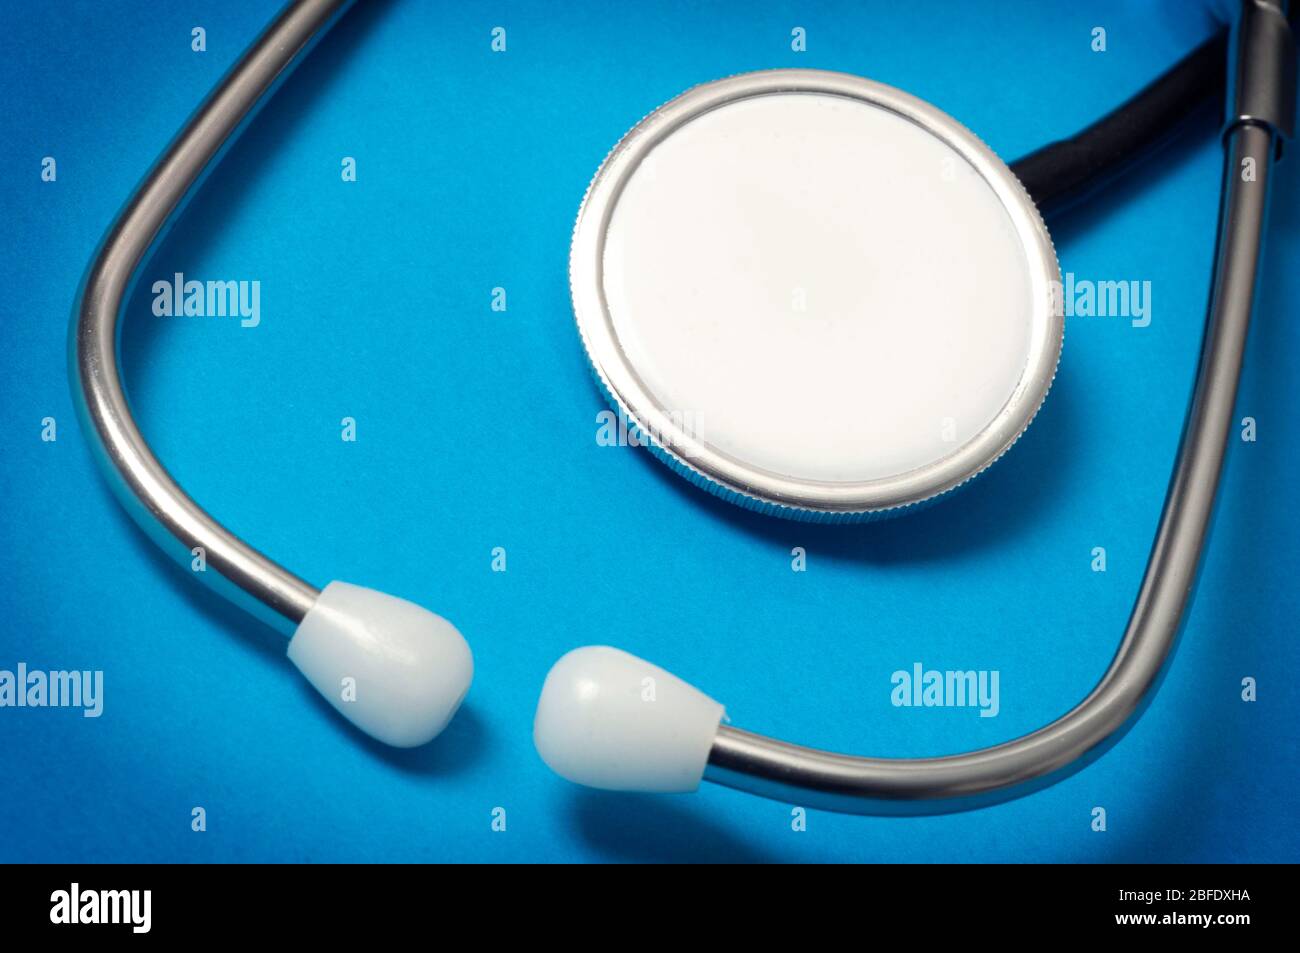 Set against a blue background, the doctor's stethoscope which was Invented  in France in 1816 by Rene-Theophile-Hyacinthe Laennes, the stethoscope is m  Stock Photo - Alamy